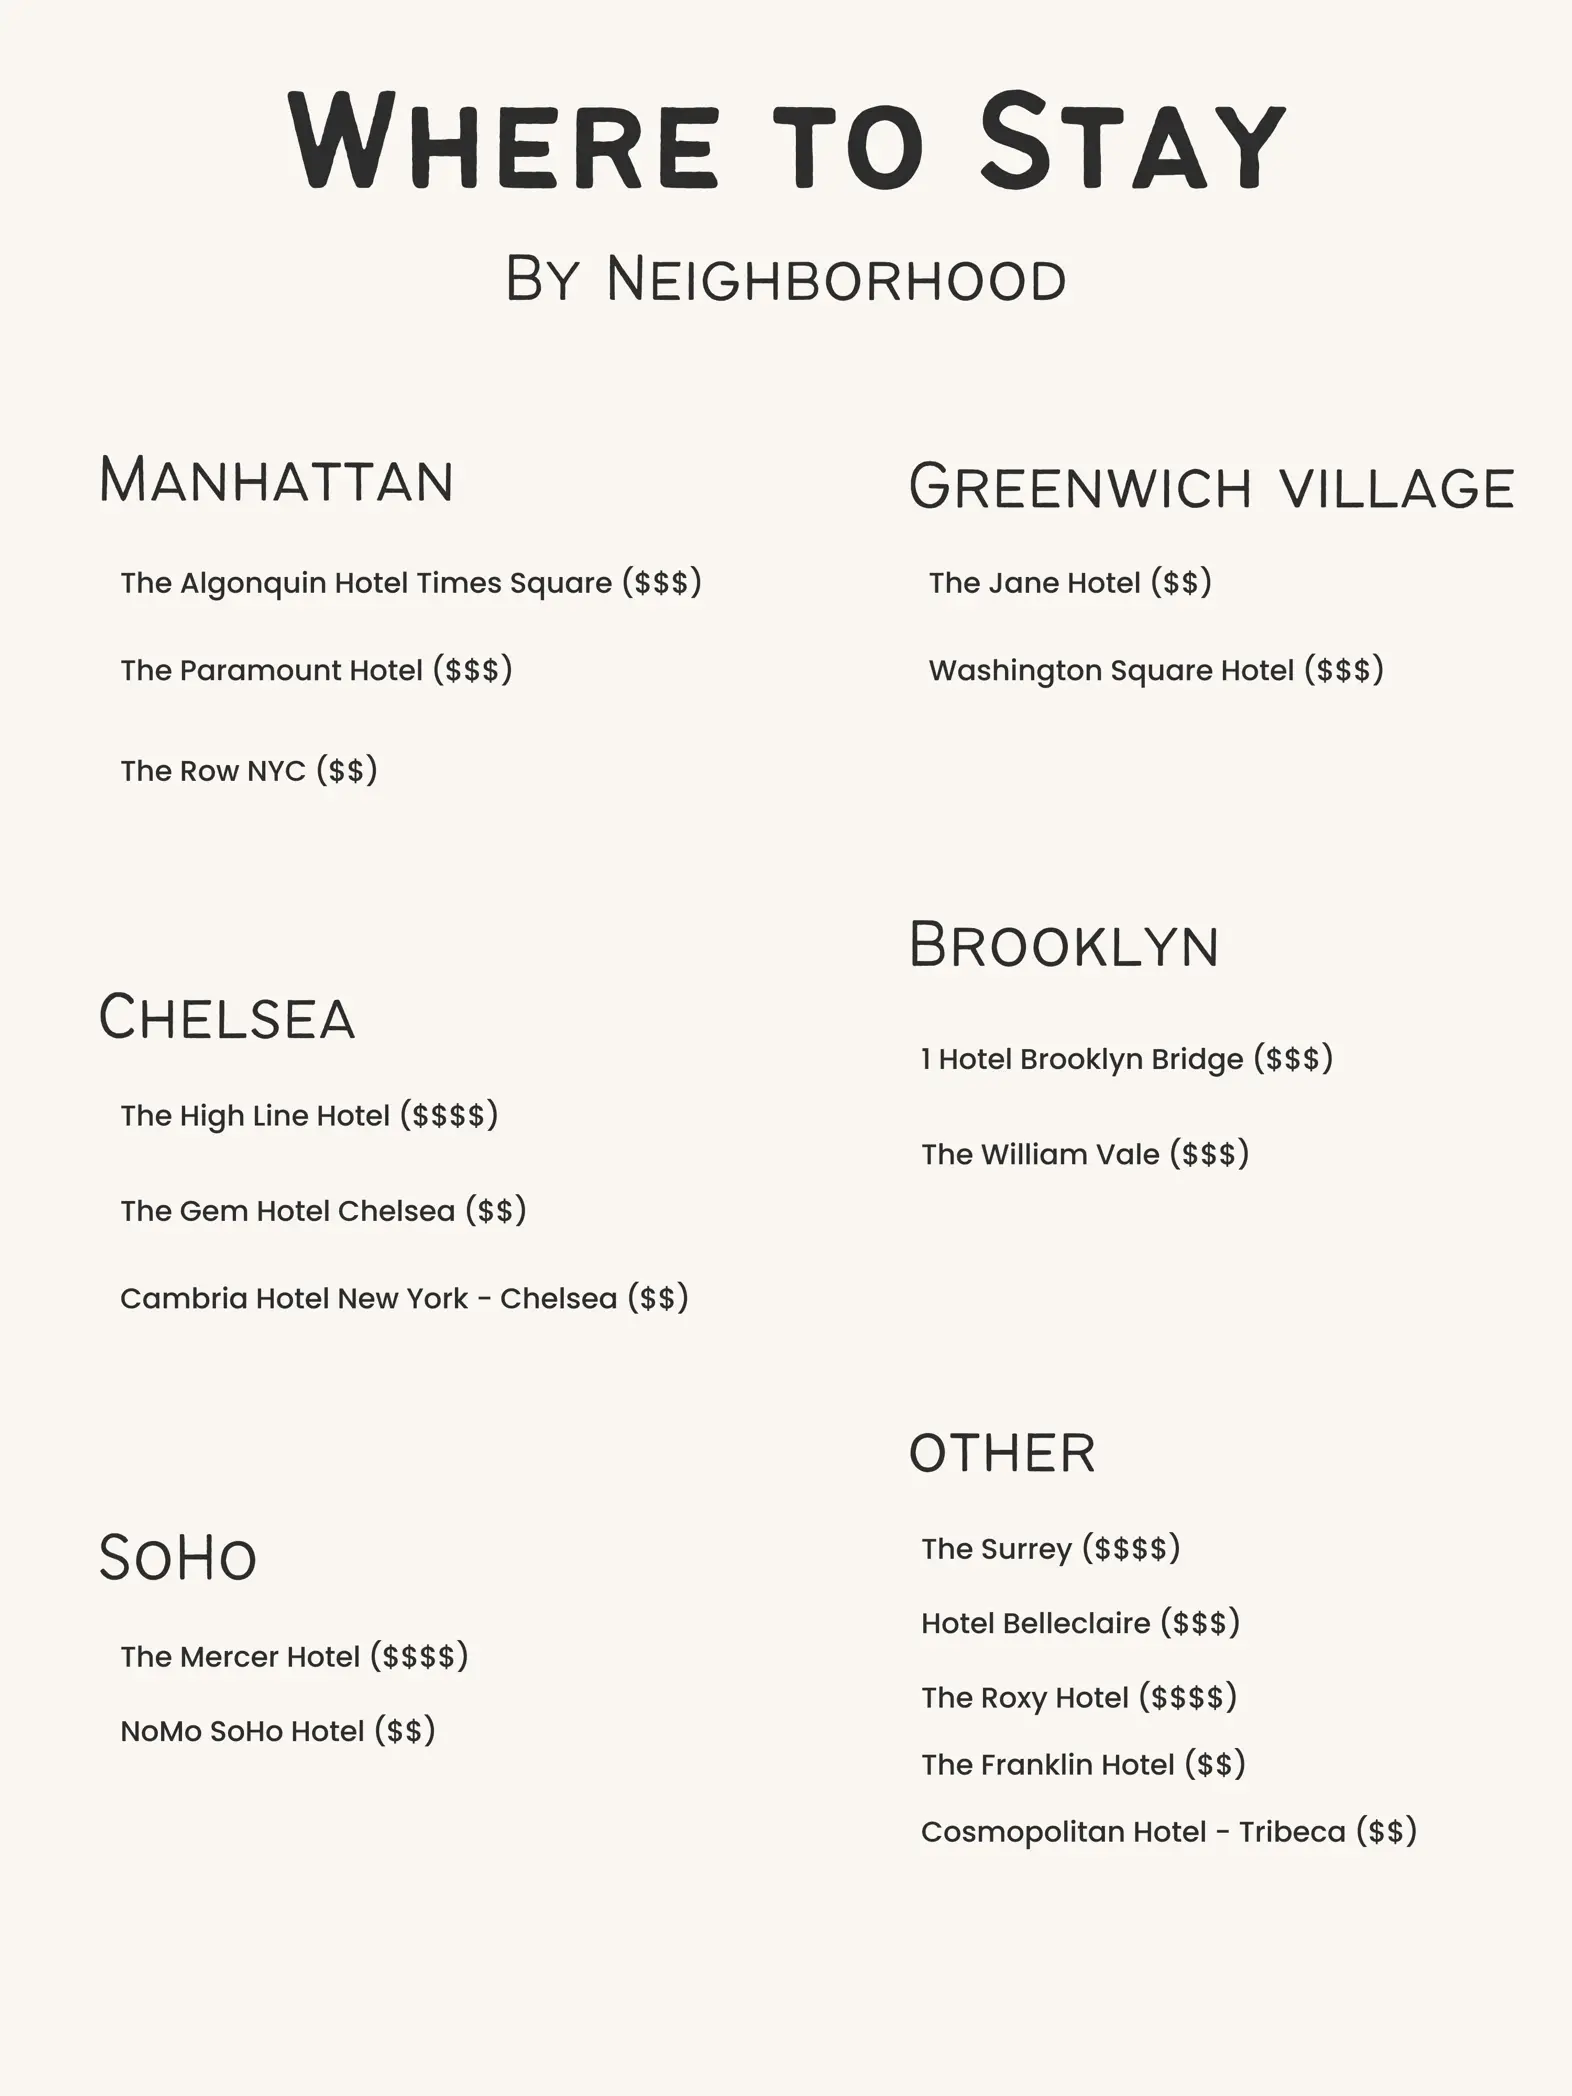  A list of hotels in New York City